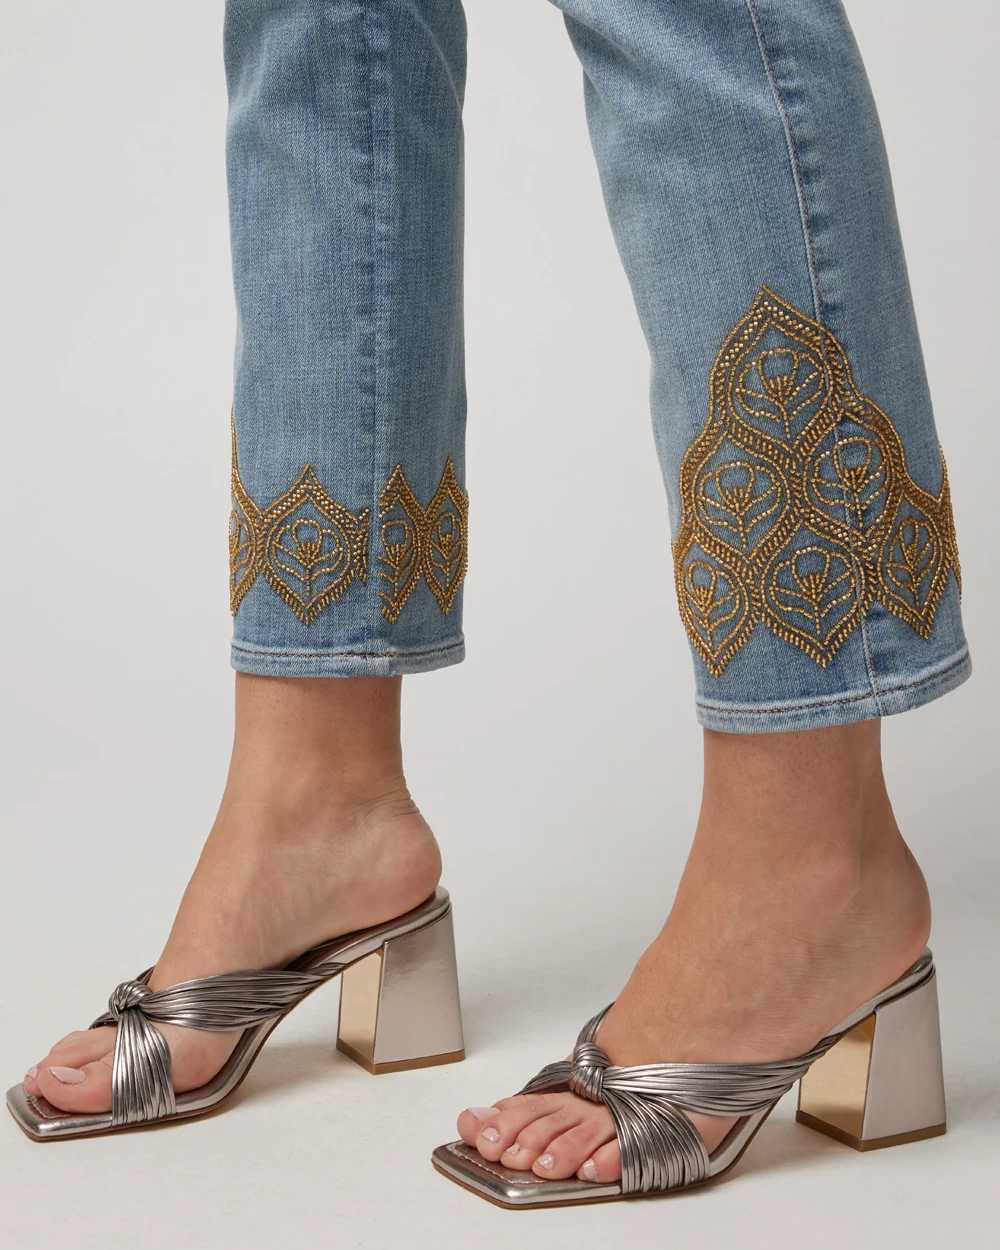 Mid-Rise Everyday Soft Denim  Embroidered Hem Slim Crop Jeans click to view larger image.